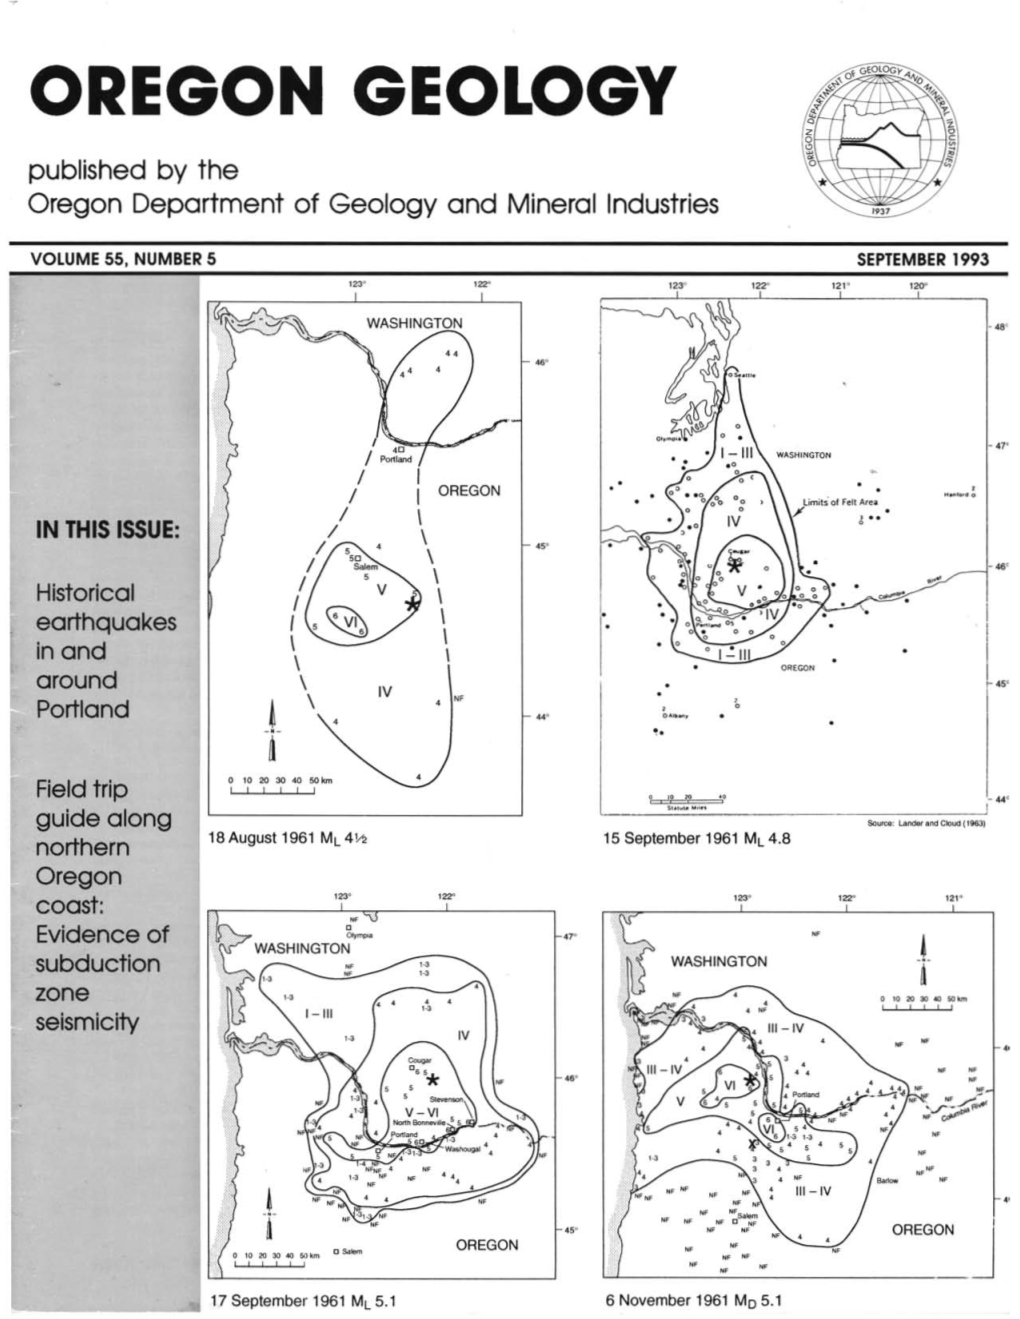 Evidence of Subduction Zone Seismicity in the Central Cascadia Margin